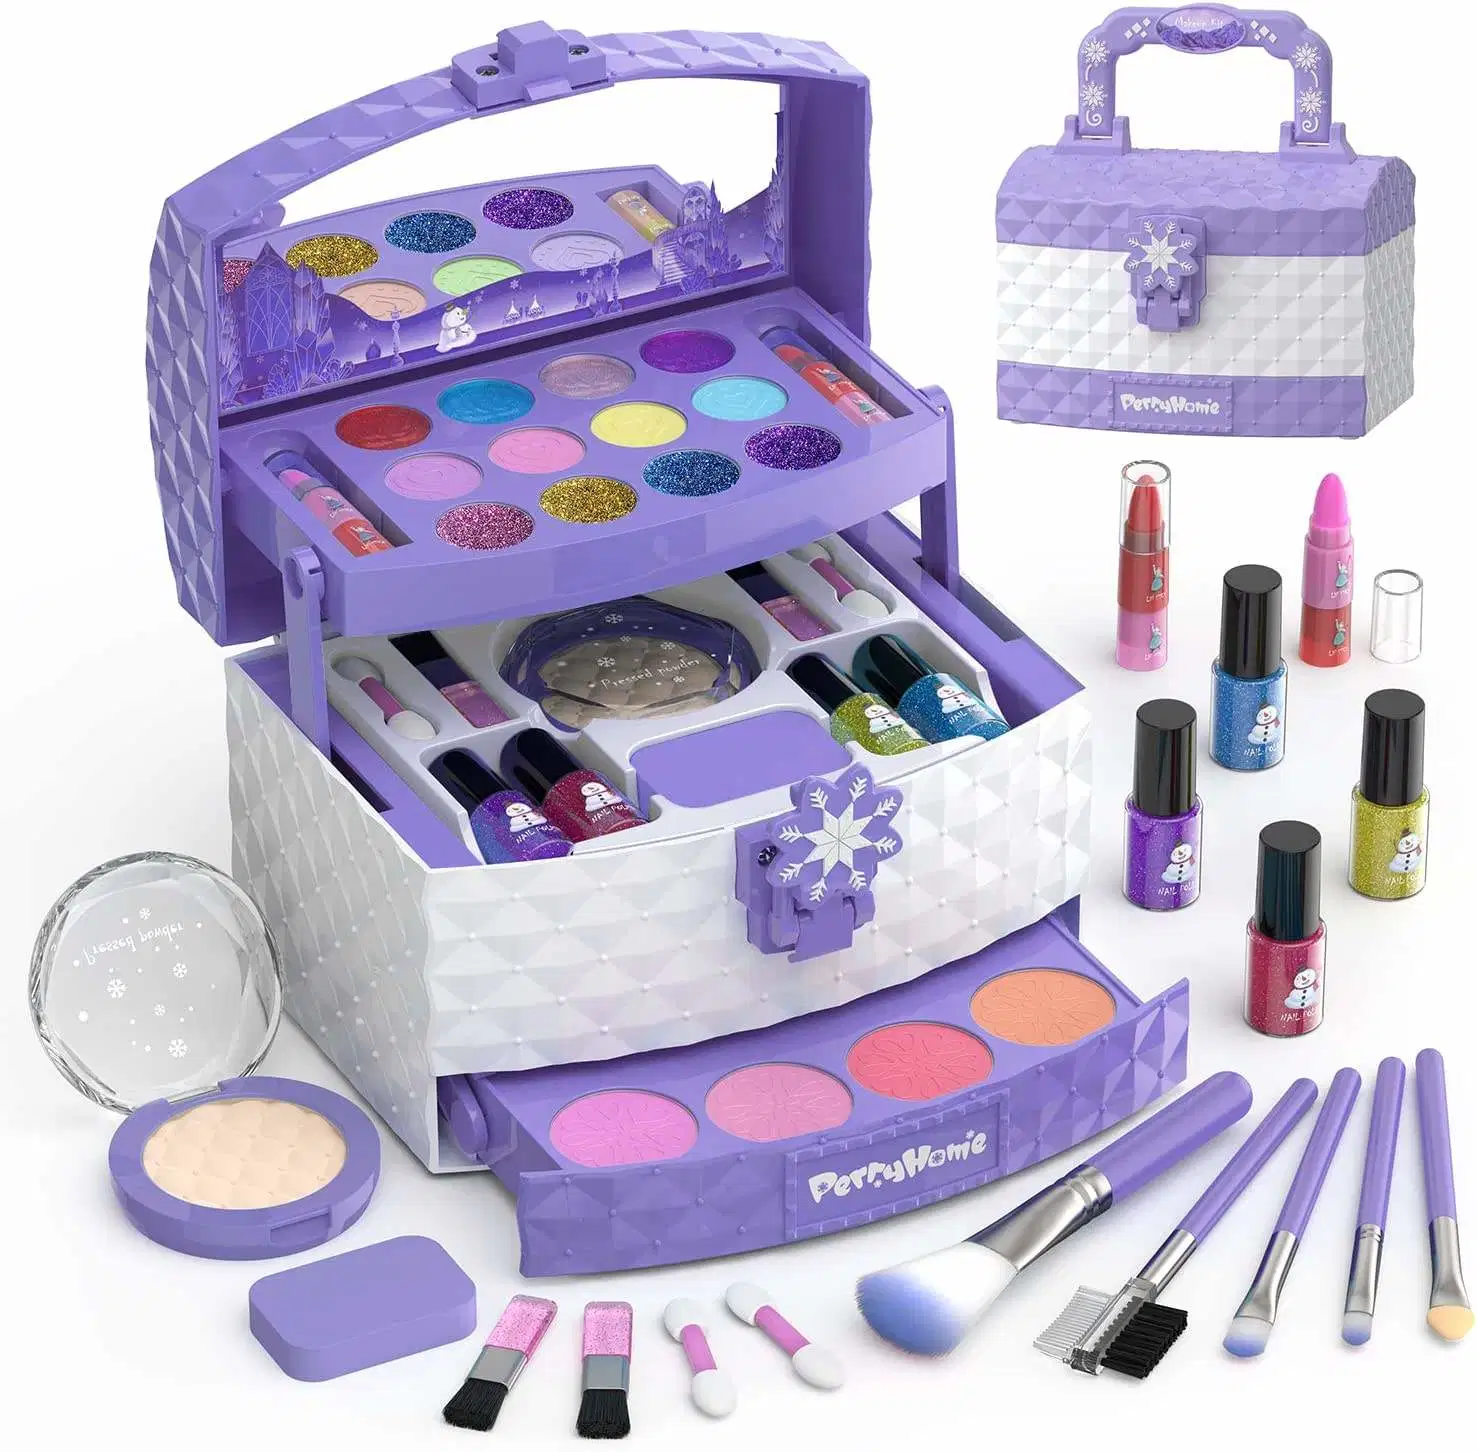 New Style Plastic Princess Toy Real Makeup Box for Girls Pretend Play Makeup Set